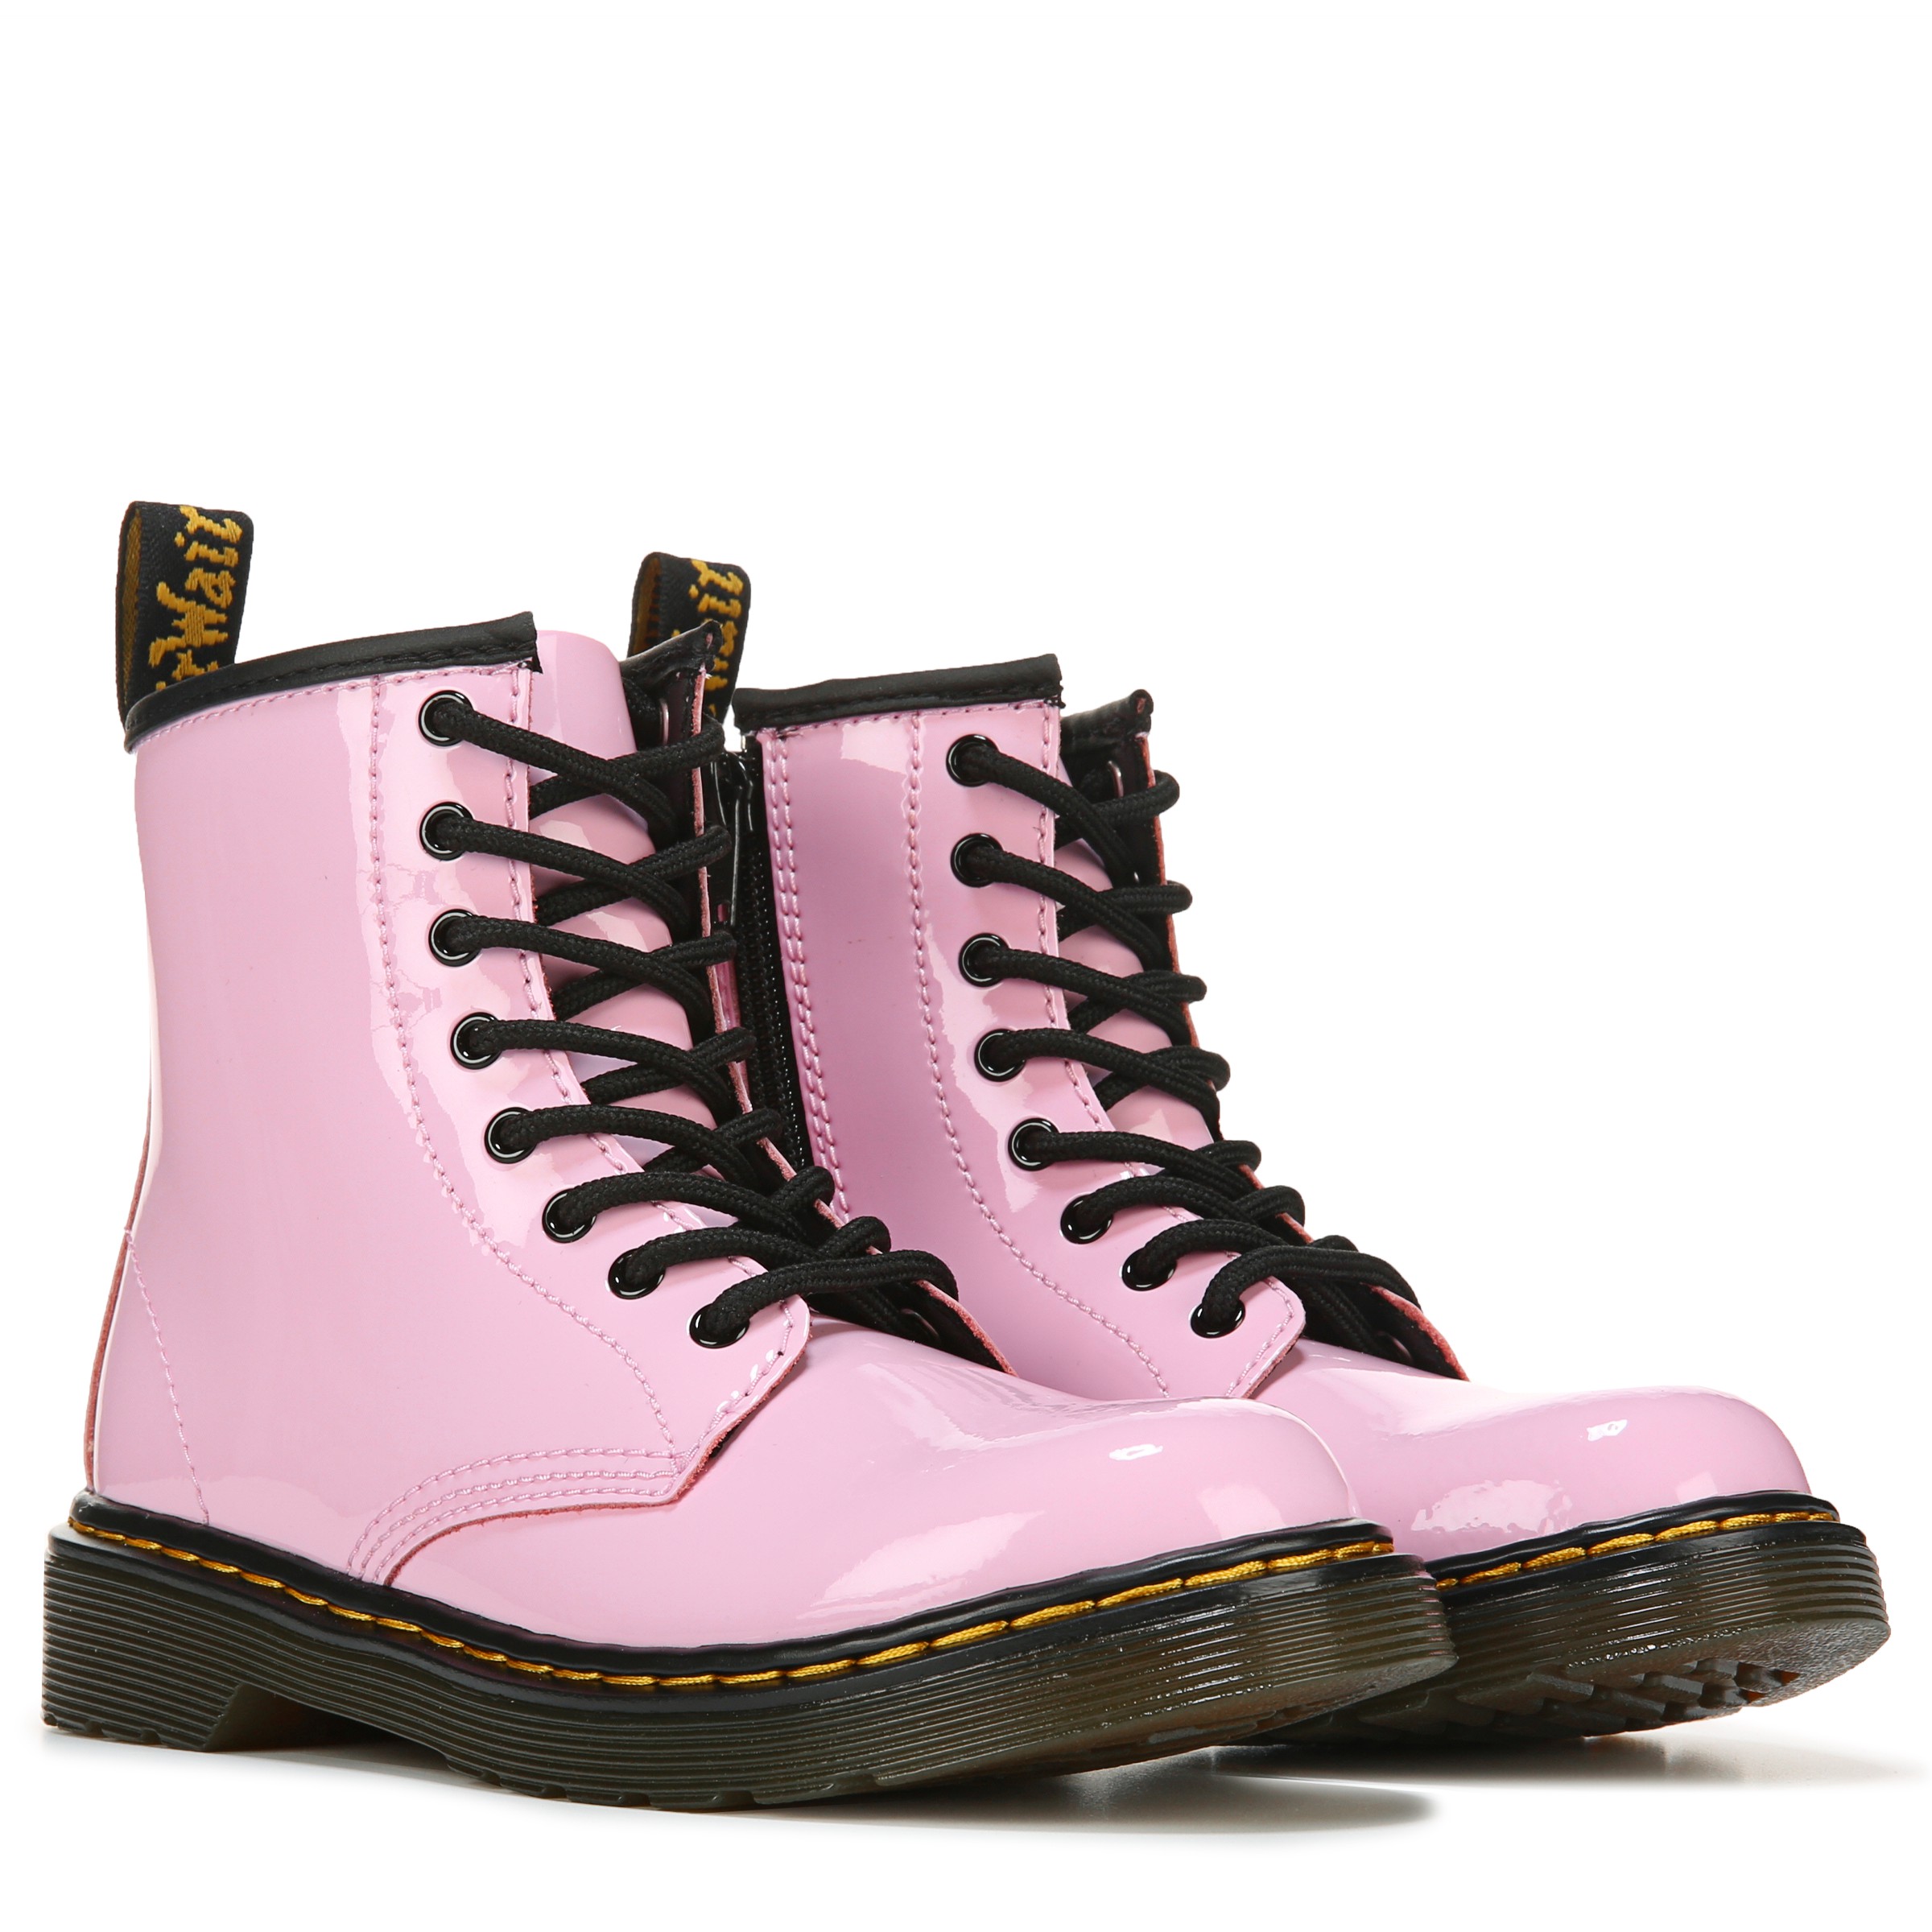 Girls Pink Patent Leather Lace Up Combat Boots, Ships Fast!